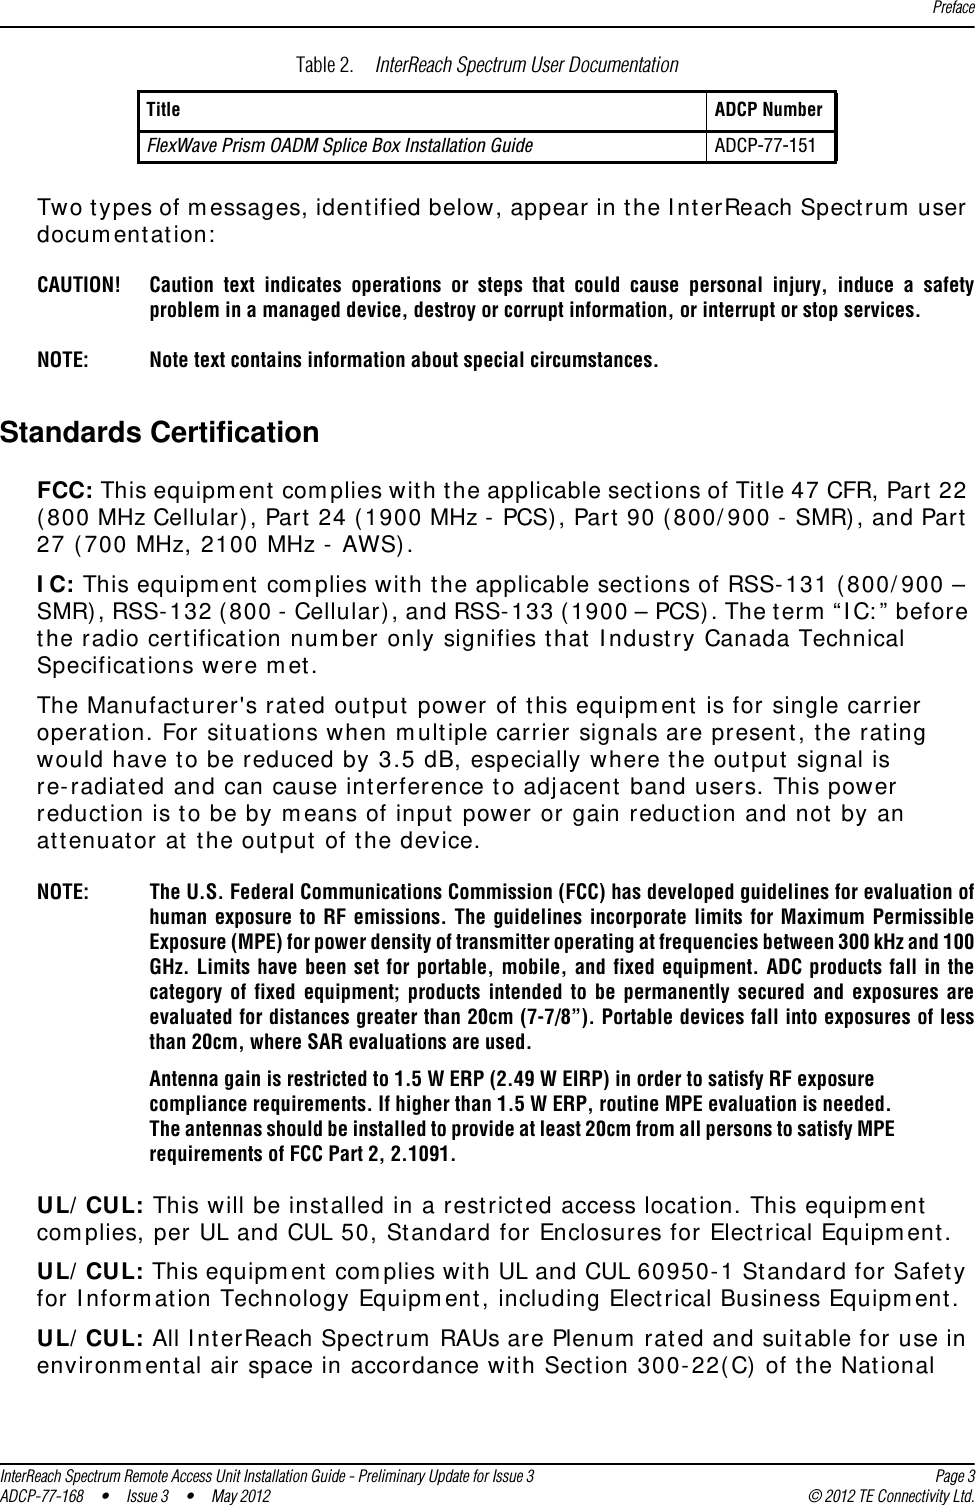 PrefaceInterReach Spectrum Remote Access Unit Installation Guide - Preliminary Update for Issue 3 Page 3ADCP-77-168 • Issue 3 • May 2012 © 2012 TE Connectivity Ltd.Two types of messages, identified below, appear in the InterReach Spectrum user documentation:CAUTION! Caution text indicates operations or steps that could cause personal injury, induce a safety problem in a managed device, destroy or corrupt information, or interrupt or stop services.NOTE: Note text contains information about special circumstances.Standards CertificationFCC: This equipment complies with the applicable sections of Title 47 CFR, Part 22 (800 MHz Cellular), Part 24 (1900 MHz - PCS), Part 90 (800/900 - SMR), and Part 27 (700 MHz, 2100 MHz - AWS).IC: This equipment complies with the applicable sections of RSS-131 (800/900 – SMR), RSS-132 (800 - Cellular), and RSS-133 (1900 – PCS). The term “IC:” before the radio certification number only signifies that Industry Canada Technical Specifications were met.The Manufacturer&apos;s rated output power of this equipment is for single carrier operation. For situations when multiple carrier signals are present, the rating would have to be reduced by 3.5 dB, especially where the output signal is re-radiated and can cause interference to adjacent band users. This power reduction is to be by means of input power or gain reduction and not by an attenuator at the output of the device. NOTE: The U.S. Federal Communications Commission (FCC) has developed guidelines for evaluation of human exposure to RF emissions. The guidelines incorporate limits for Maximum Permissible Exposure (MPE) for power density of transmitter operating at frequencies between 300 kHz and 100 GHz. Limits have been set for portable, mobile, and fixed equipment. ADC products fall in the category of fixed equipment; products intended to be permanently secured and exposures are evaluated for distances greater than 20cm (7-7/8”). Portable devices fall into exposures of less than 20cm, where SAR evaluations are used. Antenna gain is restricted to 1.5 W ERP (2.49 W EIRP) in order to satisfy RF exposure compliance requirements. If higher than 1.5 W ERP, routine MPE evaluation is needed. The antennas should be installed to provide at least 20cm from all persons to satisfy MPE requirements of FCC Part 2, 2.1091. UL/CUL: This will be installed in a restricted access location. This equipment complies, per UL and CUL 50, Standard for Enclosures for Electrical Equipment. UL/CUL: This equipment complies with UL and CUL 60950-1 Standard for Safety for Information Technology Equipment, including Electrical Business Equipment.UL/CUL: All InterReach Spectrum RAUs are Plenum rated and suitable for use in environmental air space in accordance with Section 300-22(C) of the National FlexWave Prism OADM Splice Box Installation Guide ADCP-77-151Table 2.  InterReach Spectrum User DocumentationTitle ADCP Number 